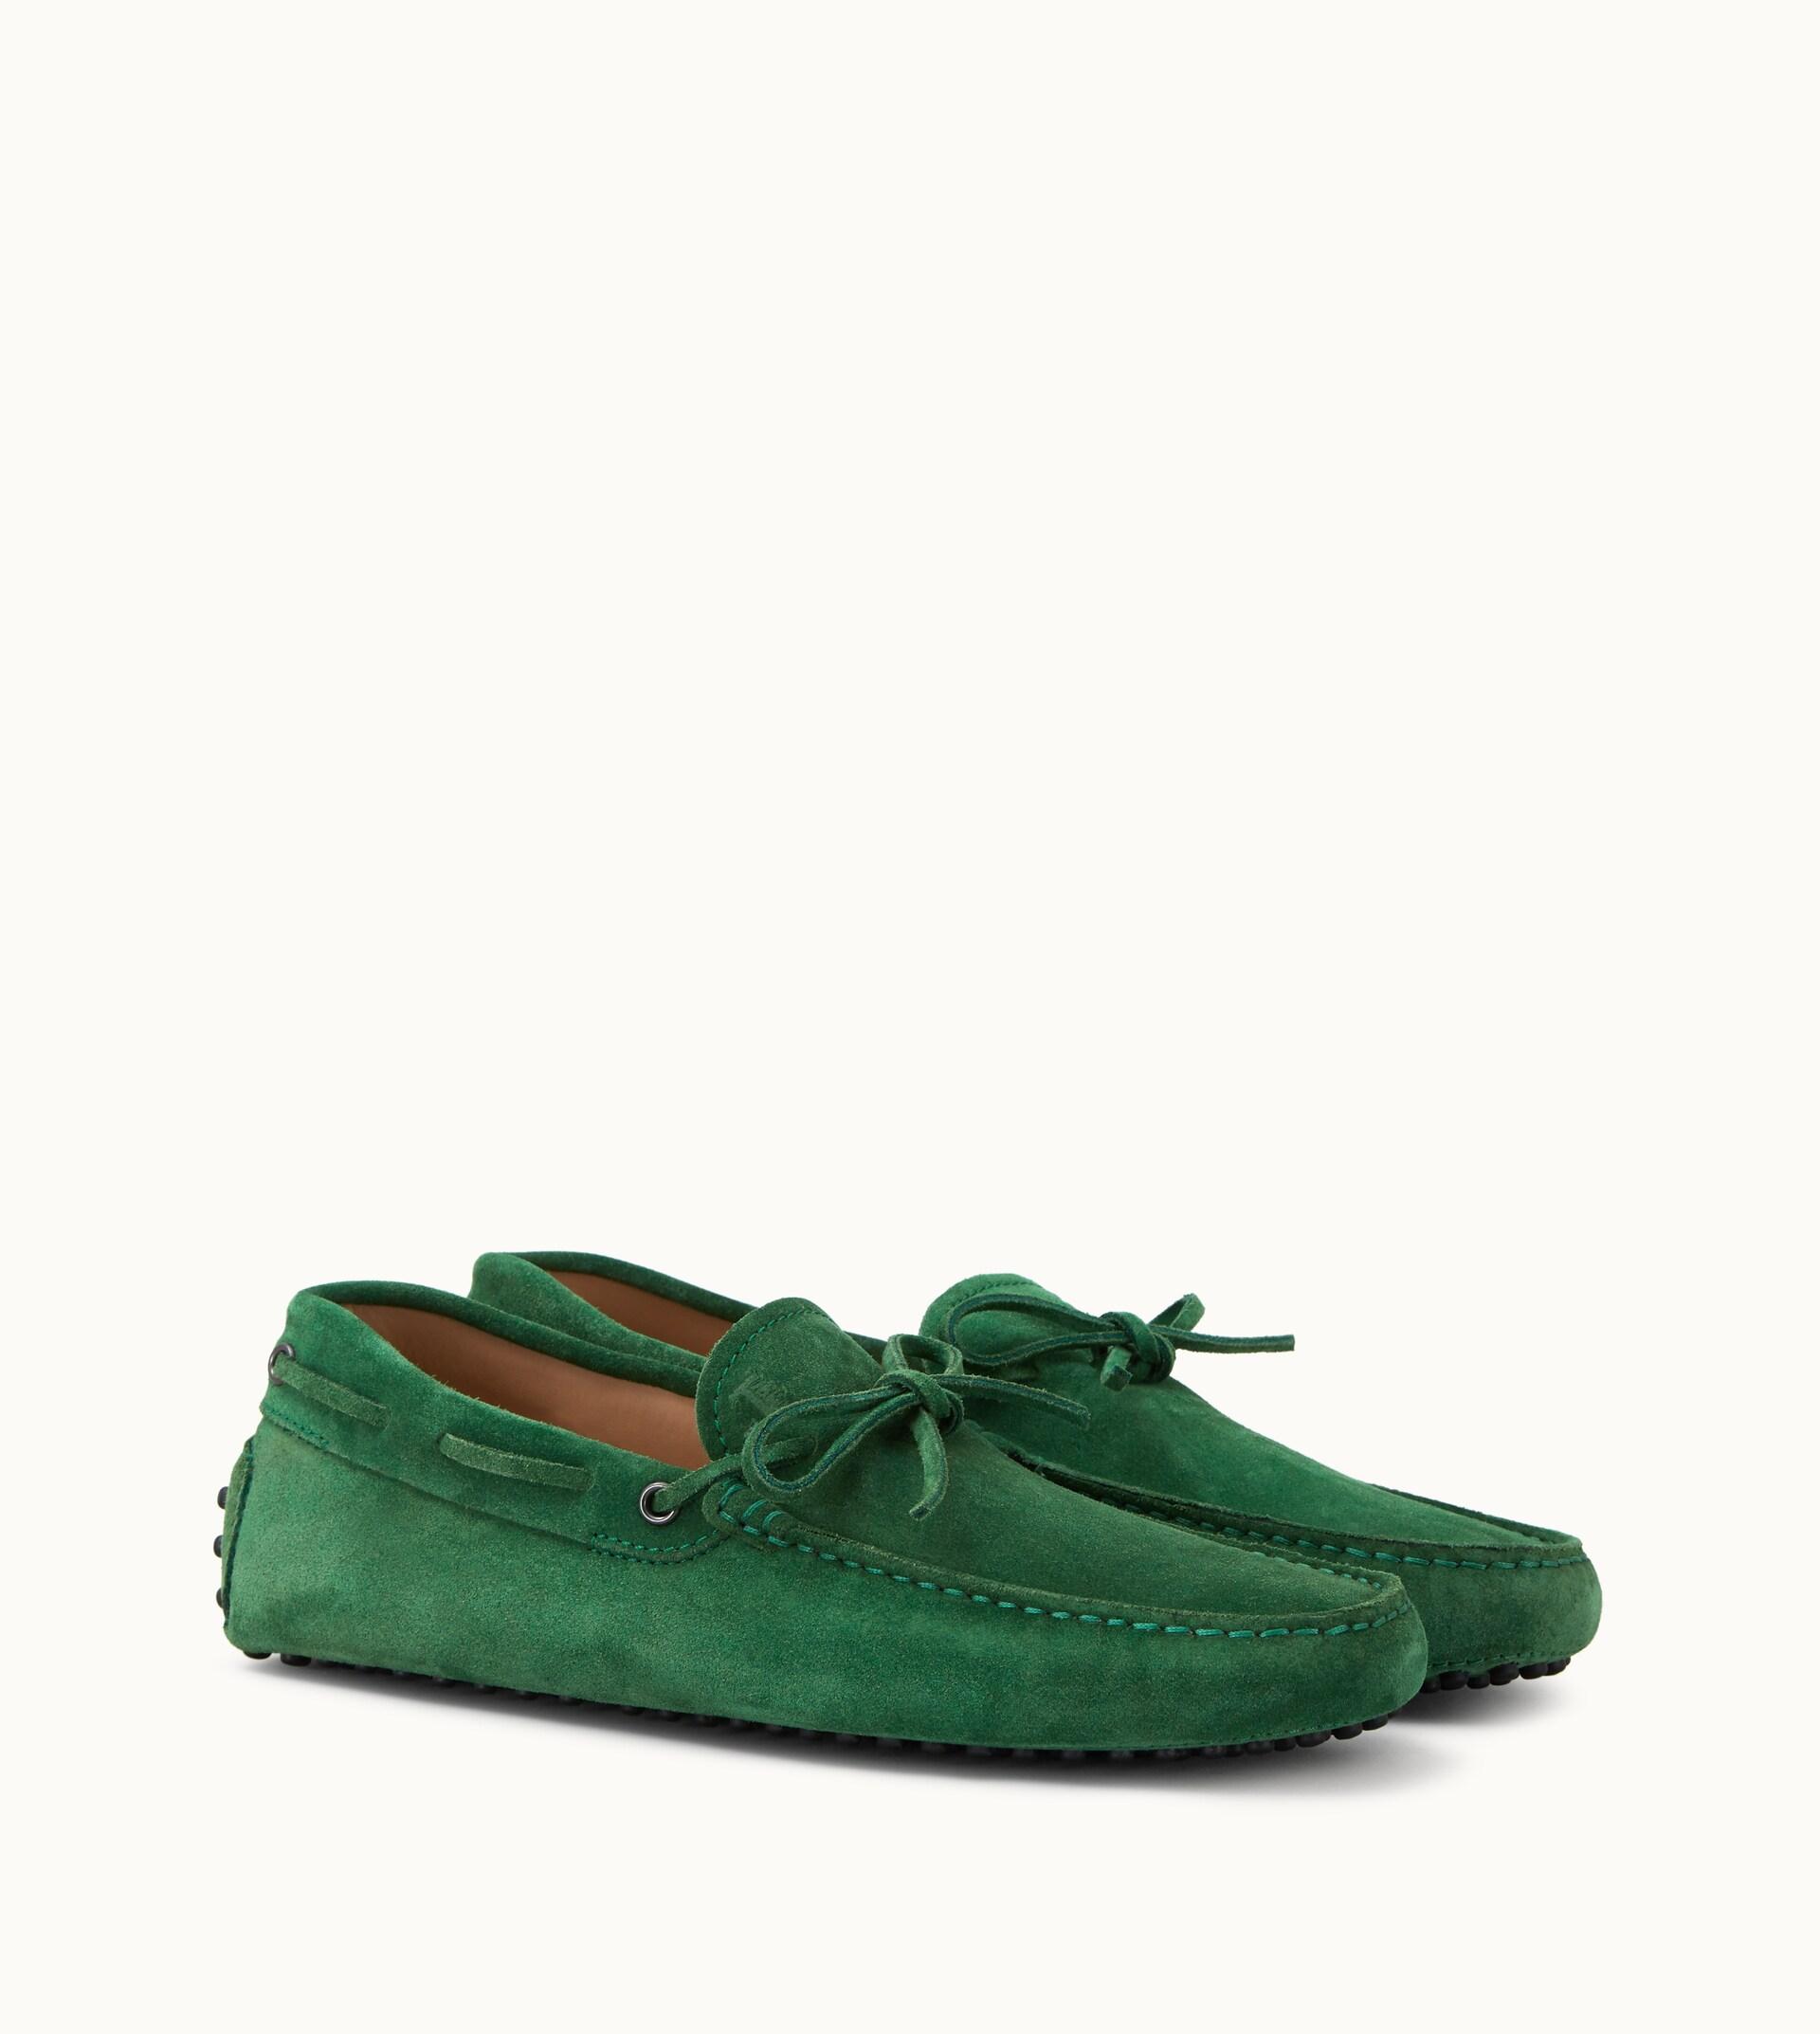 Tod's Gommino Driving Shoes In Suede in Green for Men - Lyst